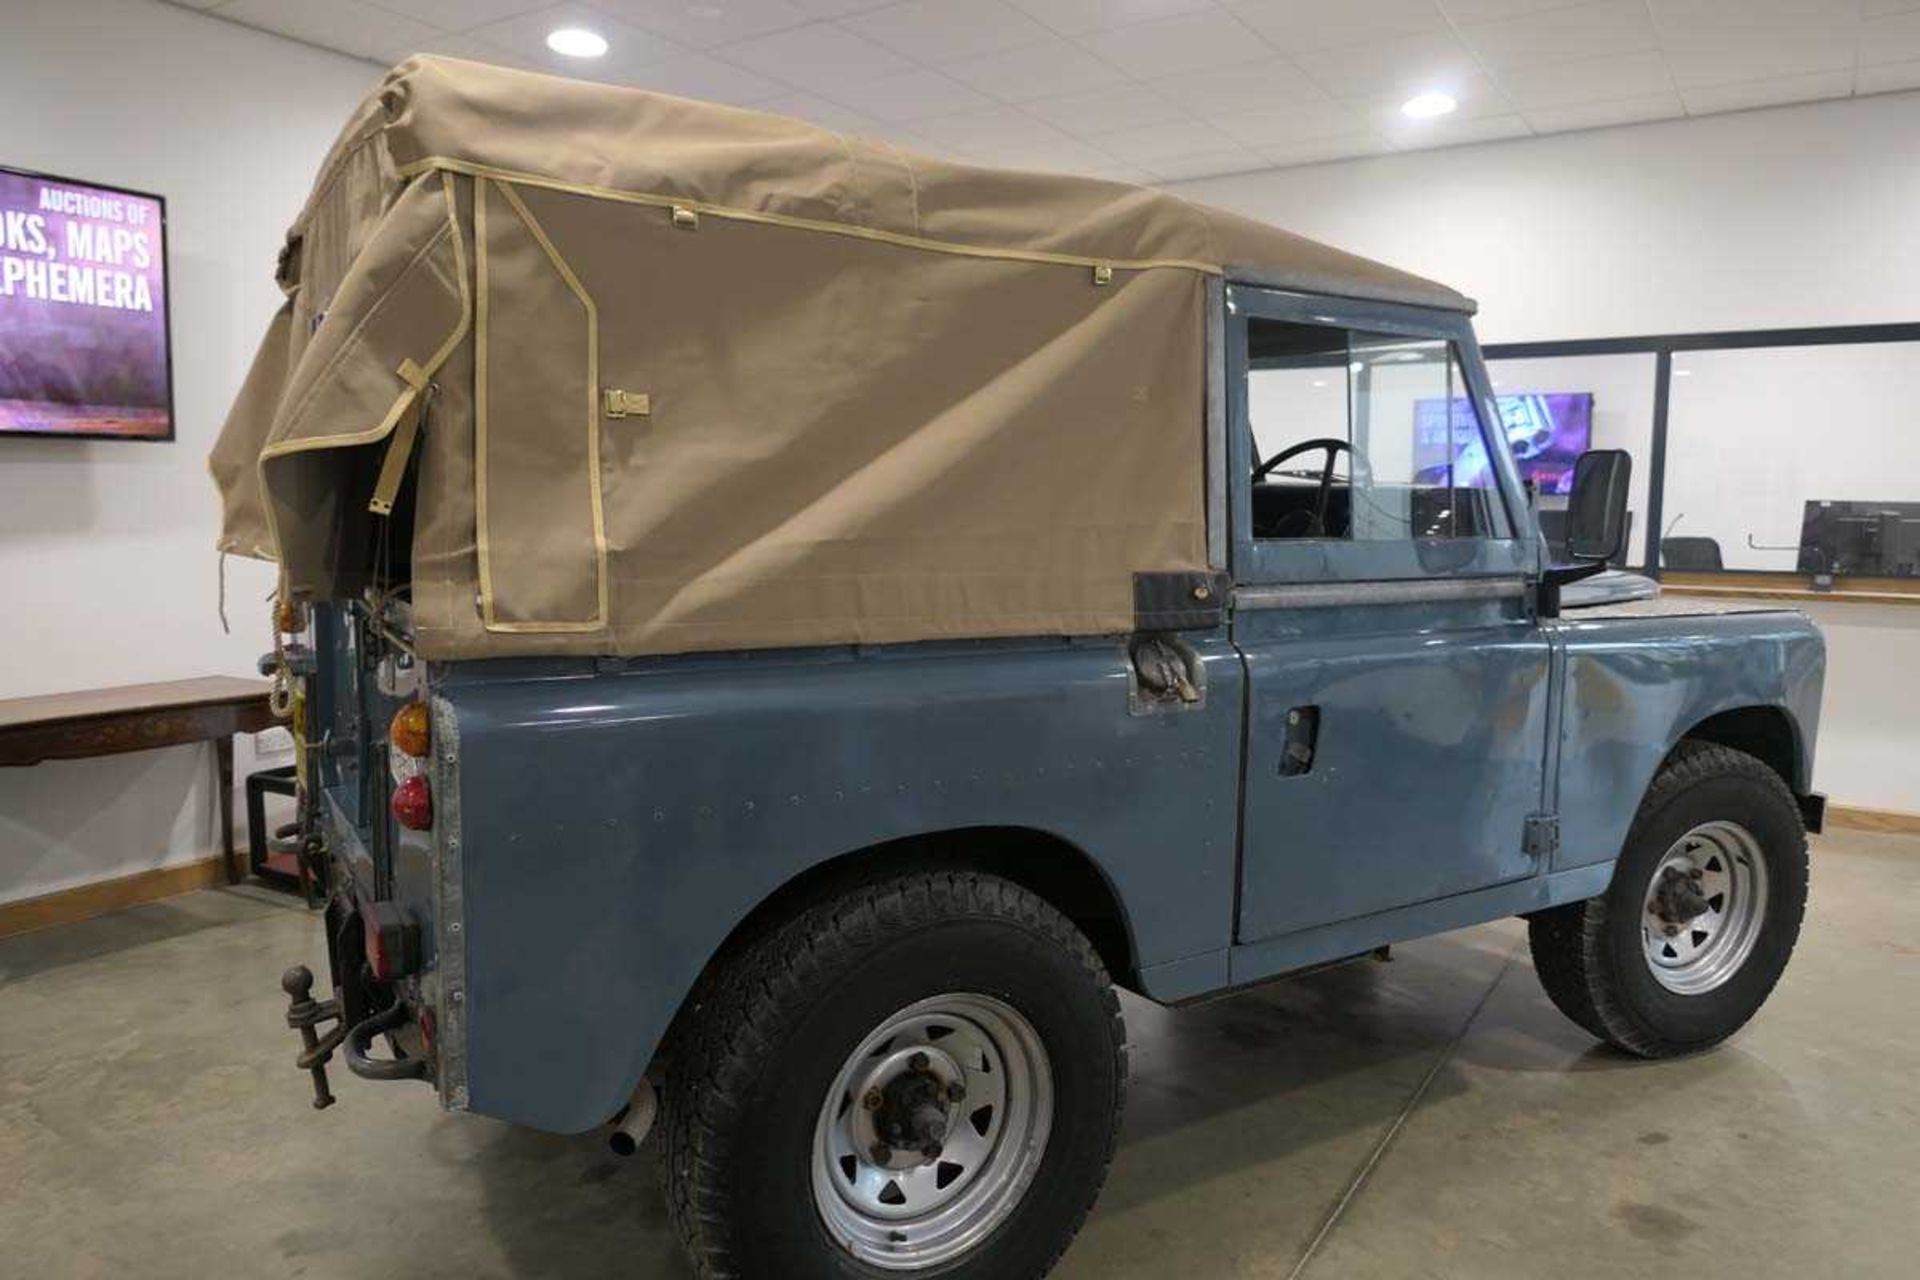 (LHD 219W) 1981 Land Rover Series 3, light 4x4 utility, 88" - 4 cyl in blue, first registered 01. - Image 14 of 17